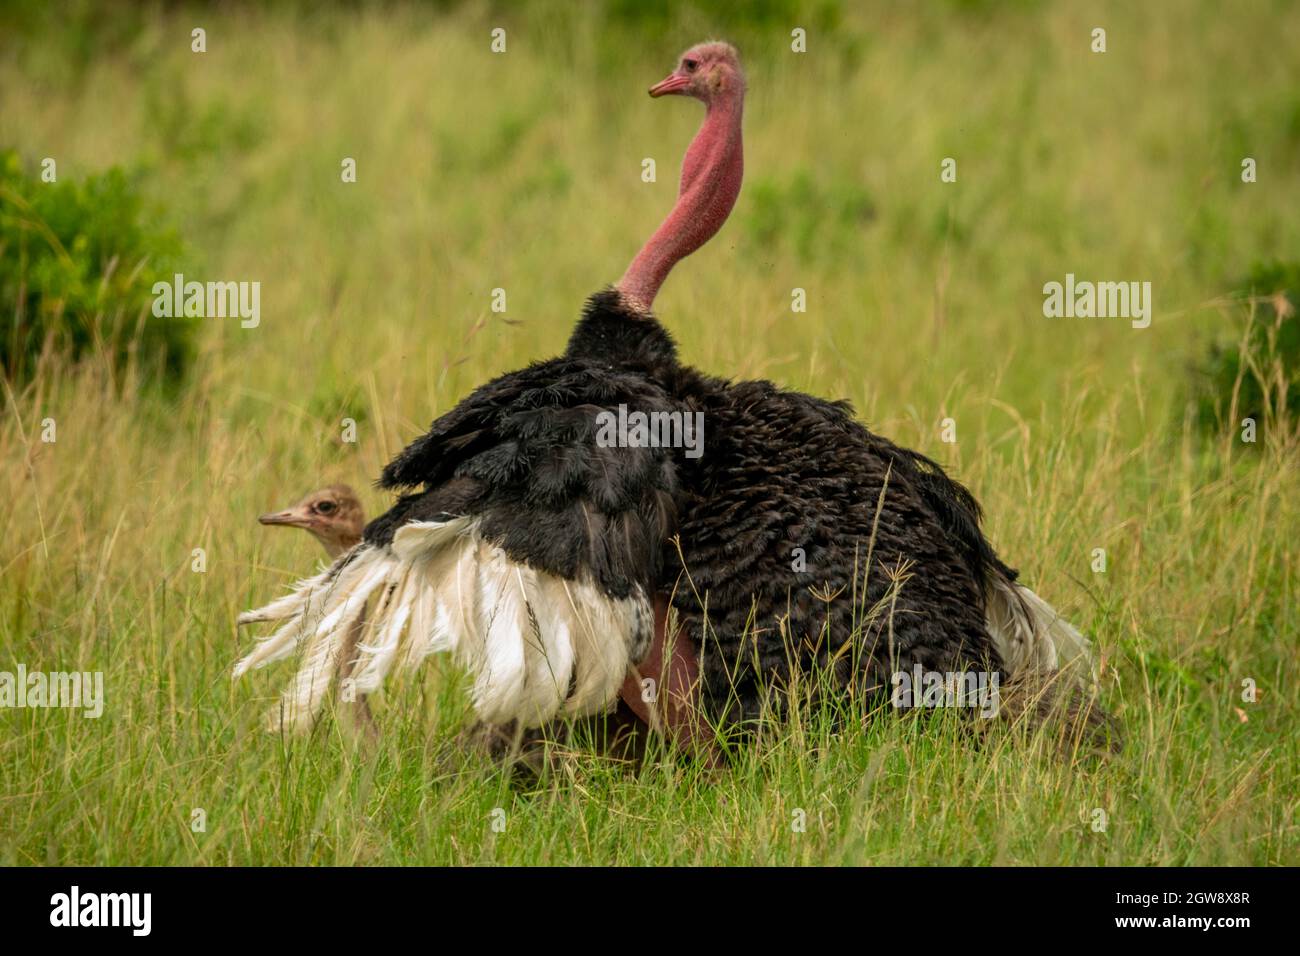 Two Common Ostriches Mate In Long Grass Stock Photo